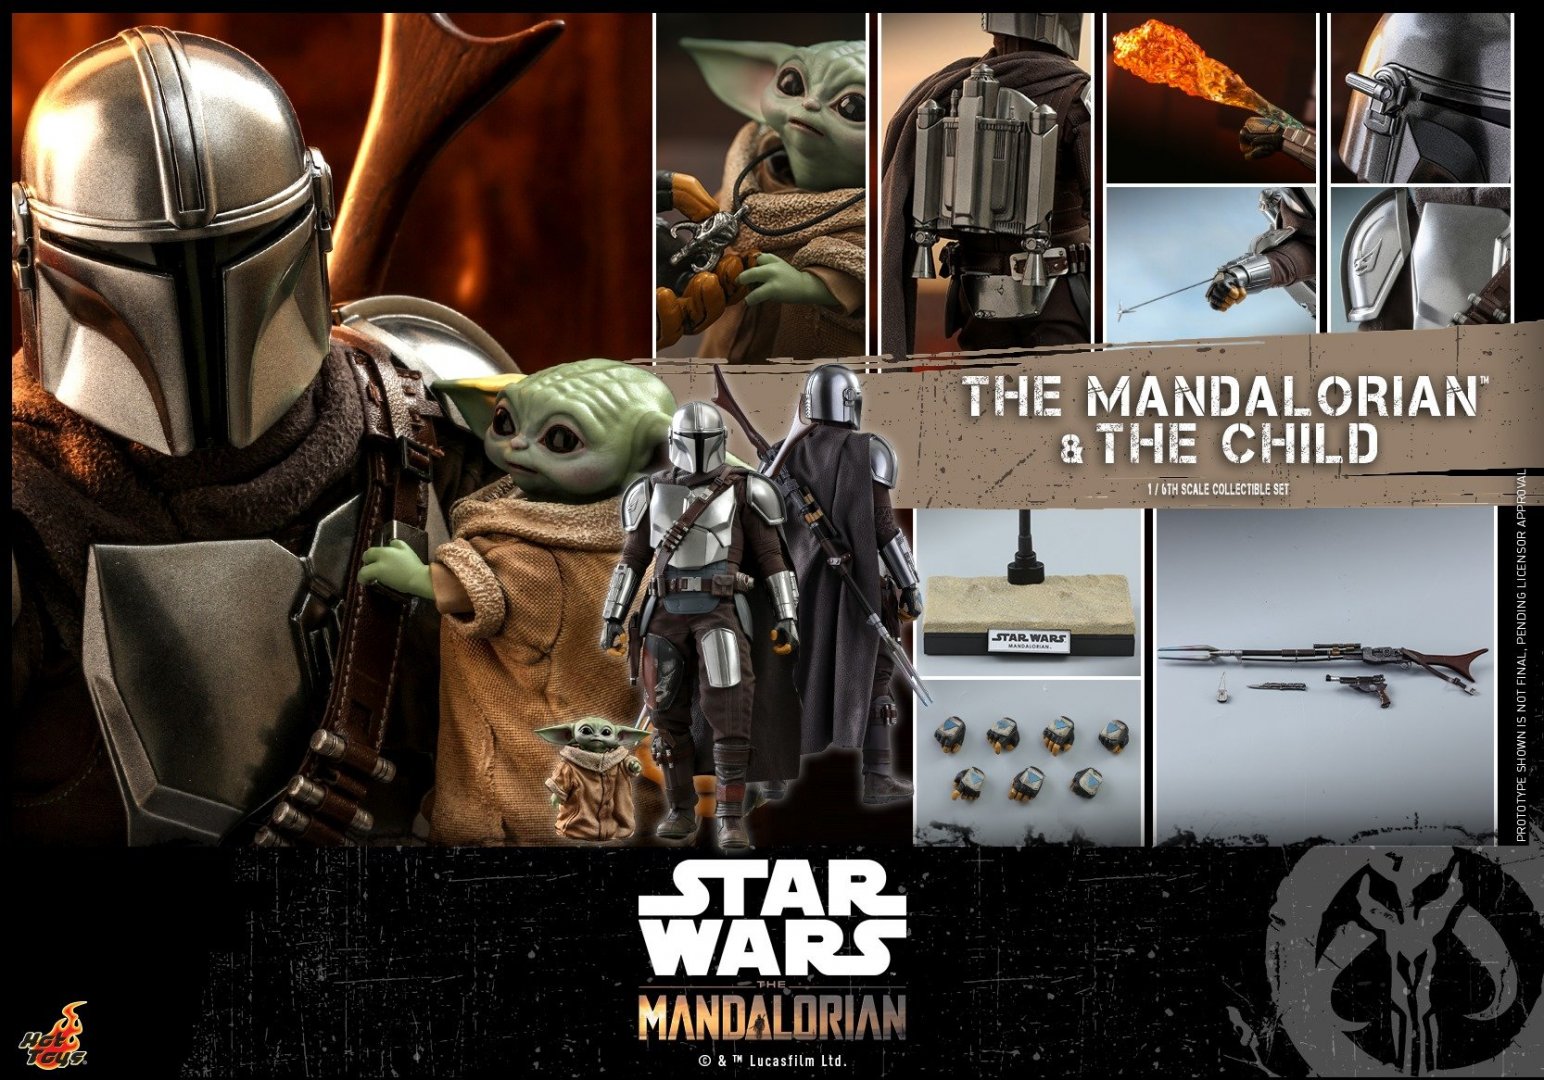 Hot-Toys-Mandalorian-and-The-Child-018.jpg